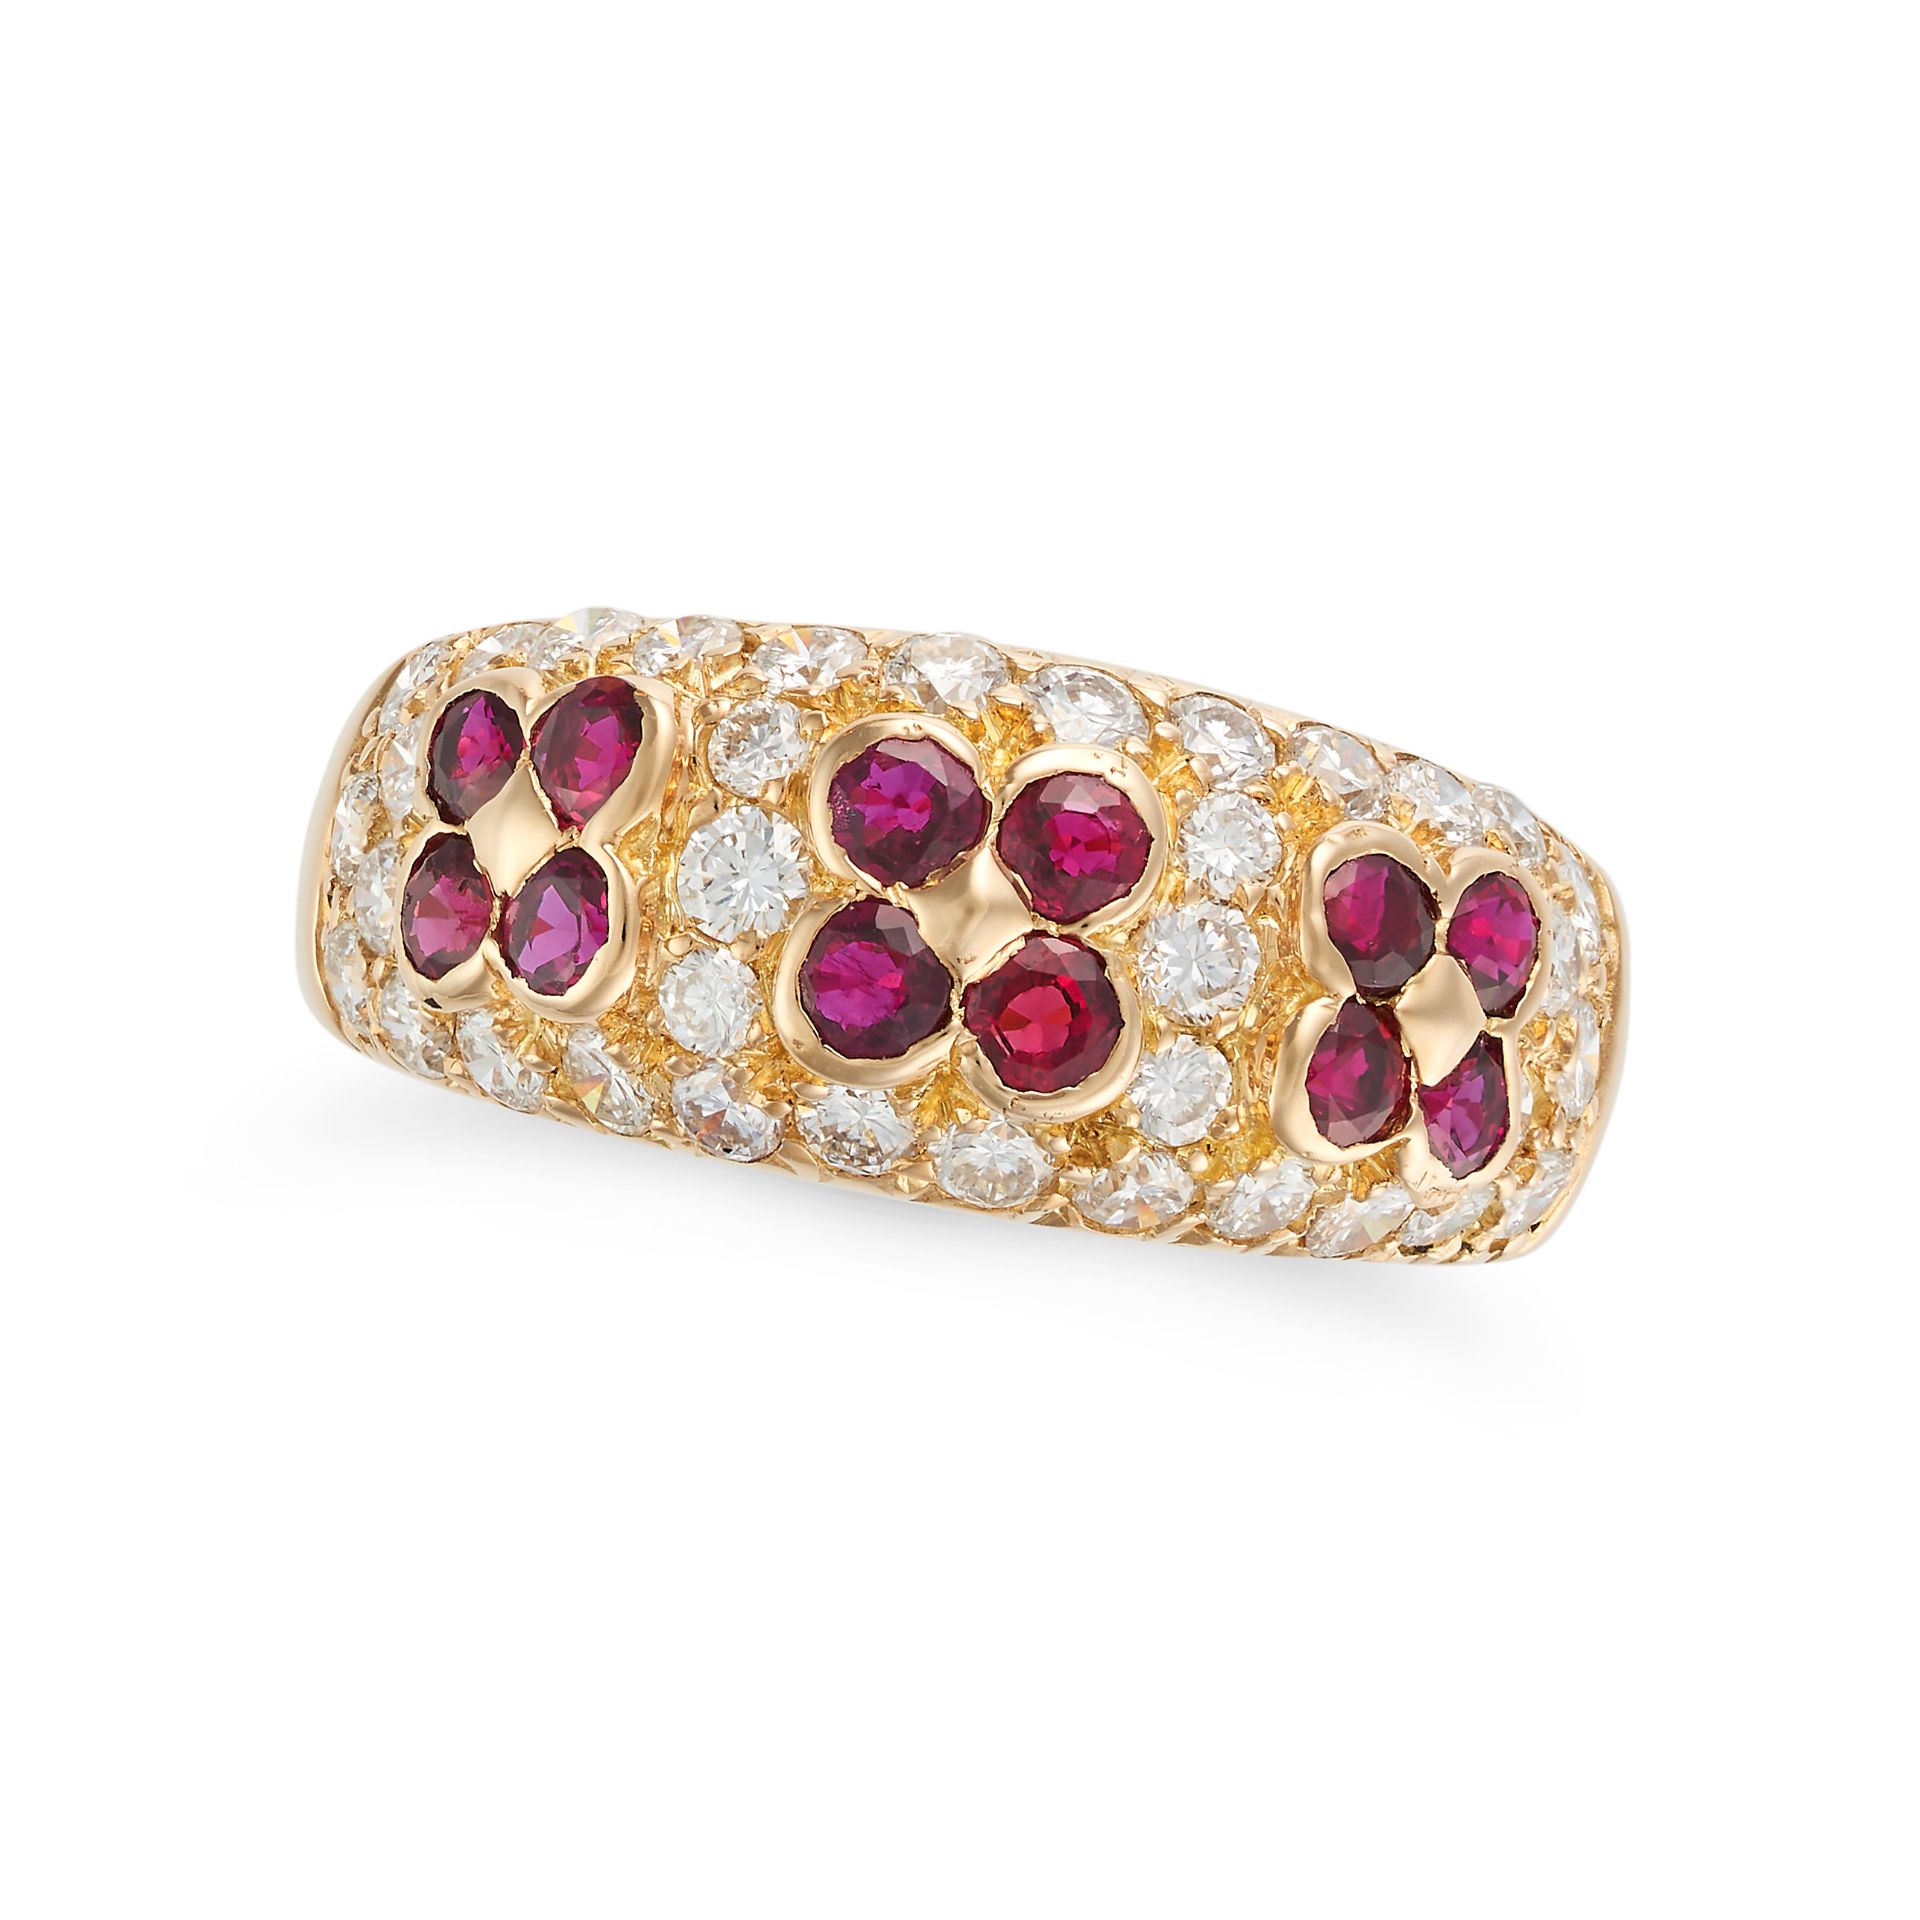 VAN CLEEF & ARPELS, A RUBY AND DIAMOND FLOWER RING in 18ct yellow gold, the bombe face set with r...